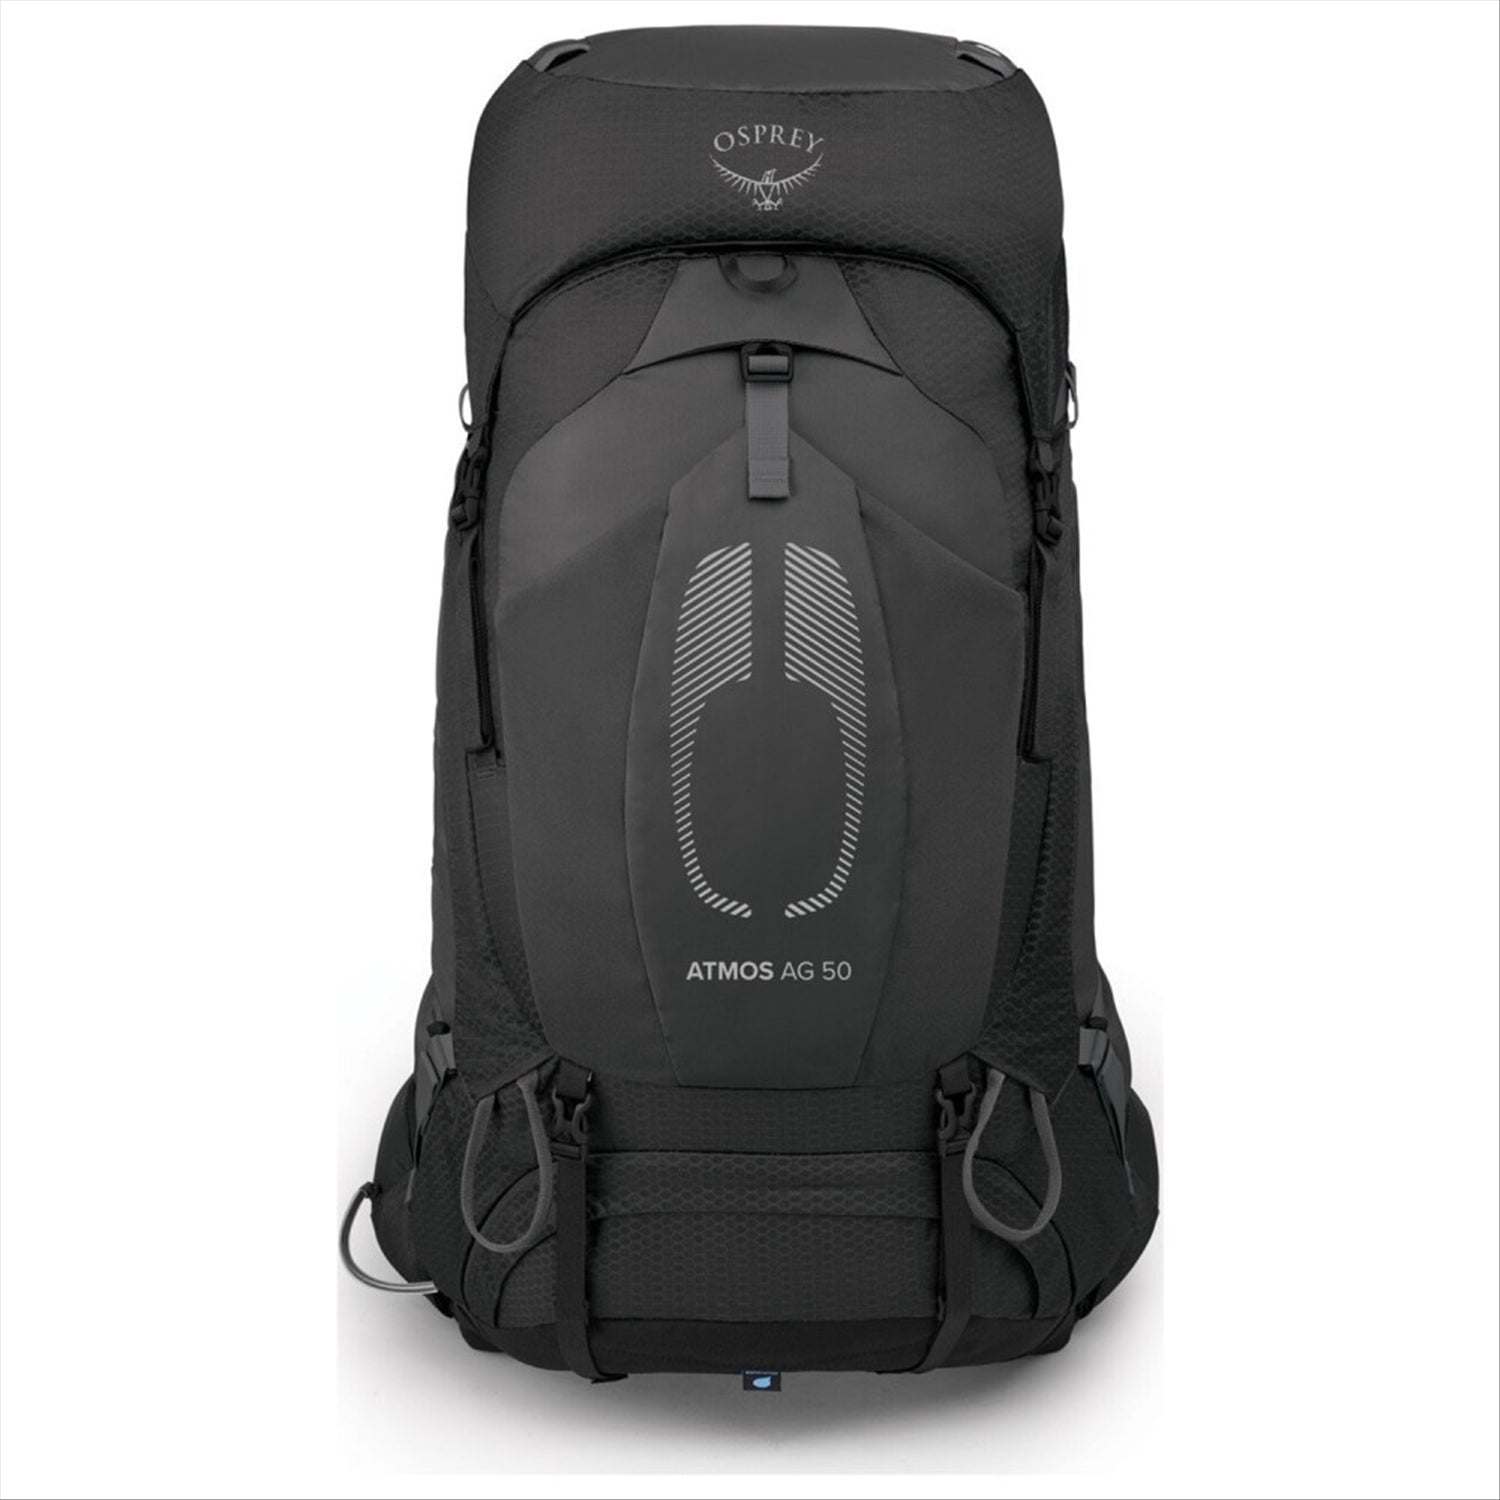 Osprey Atmos 50 Backpack - Hiking Backpacks from Intents Outdoors